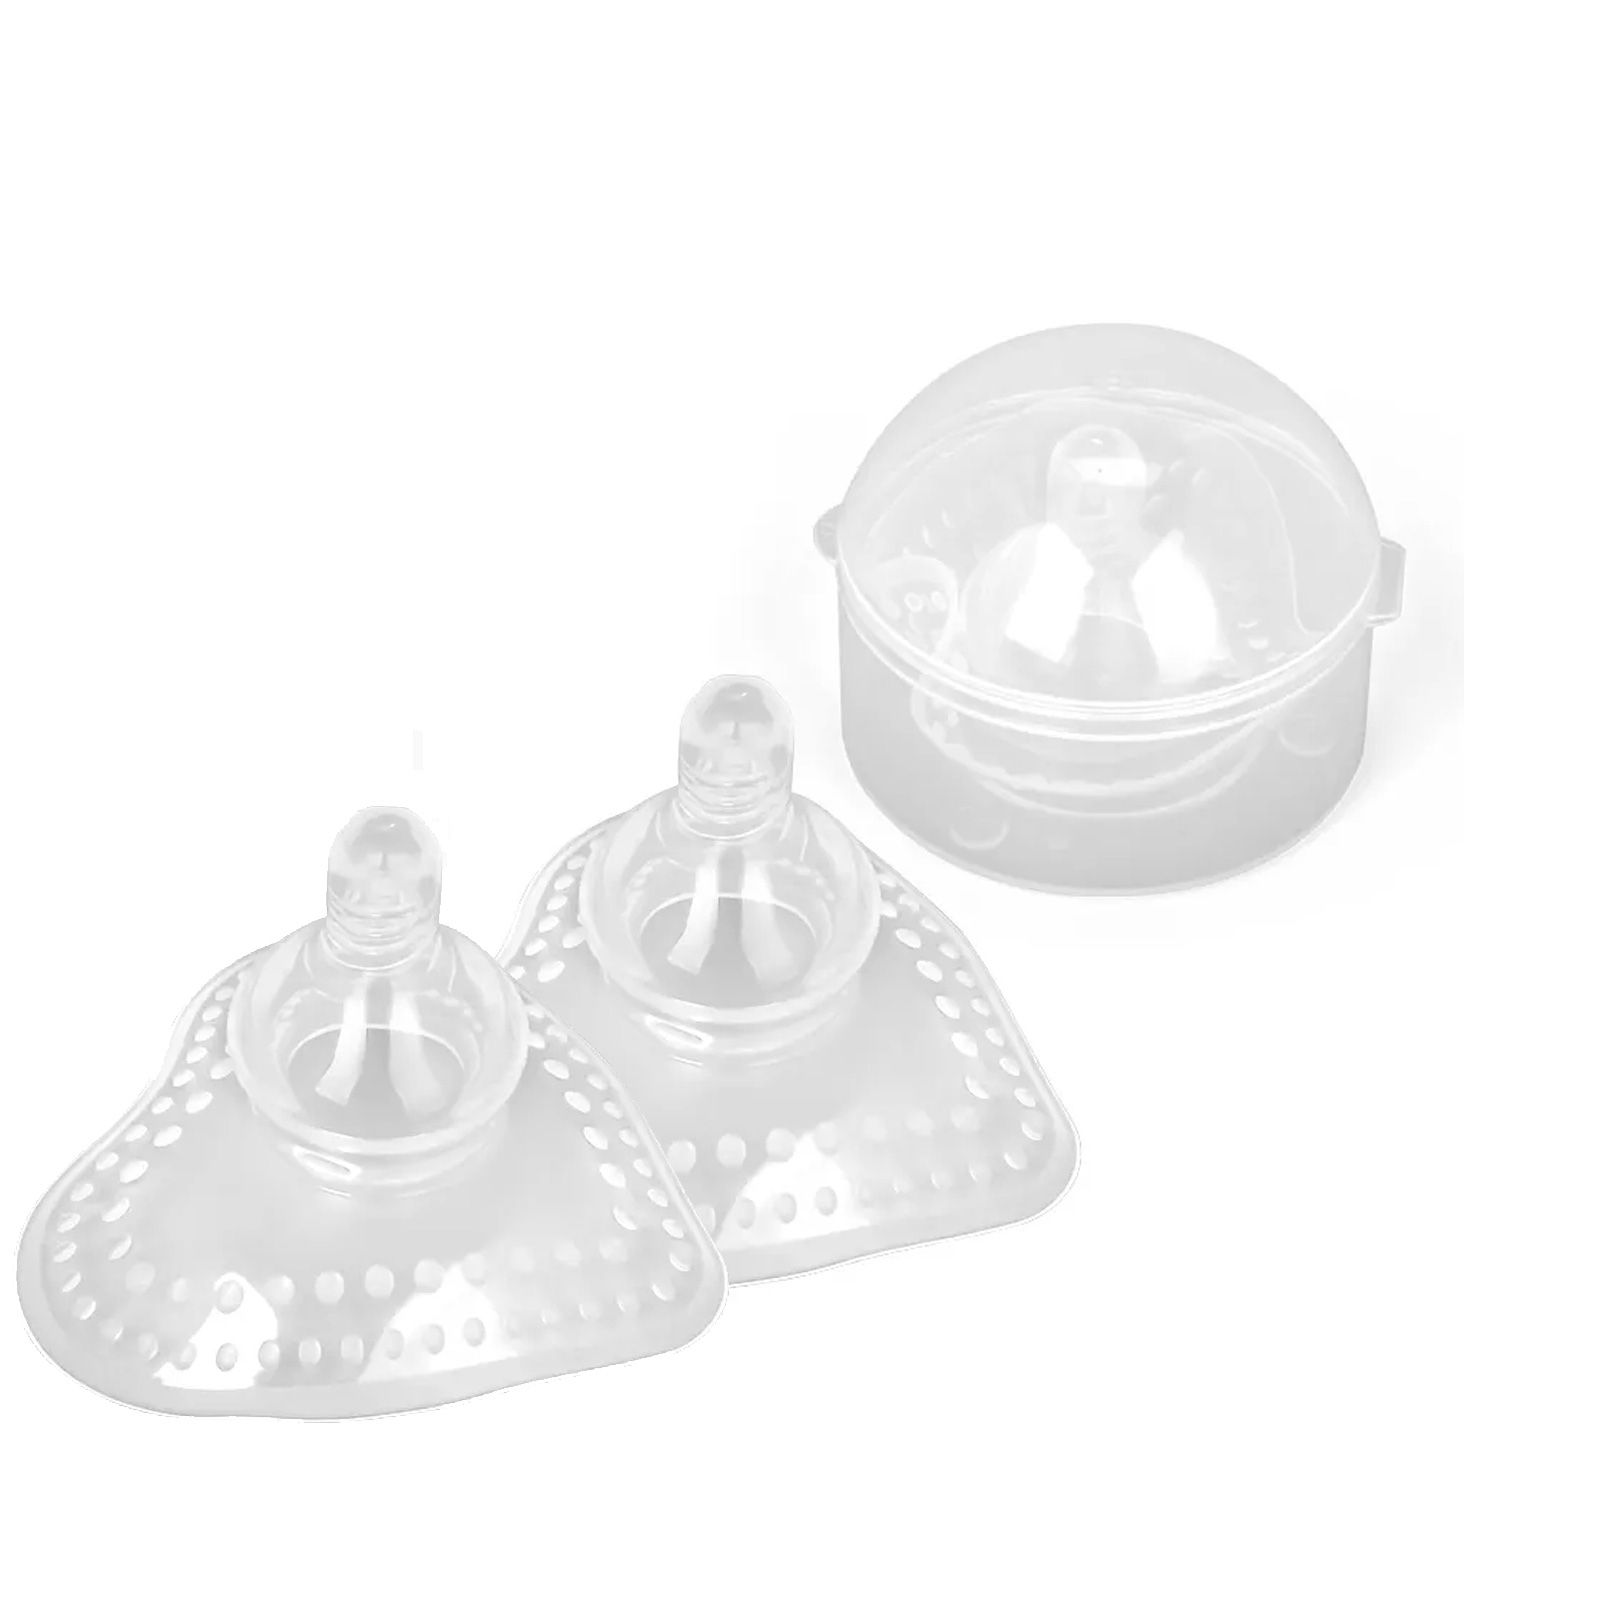 2-pack Nipple Shield For Nursing With Storage Case Protect Sore Or Cracked Nipples